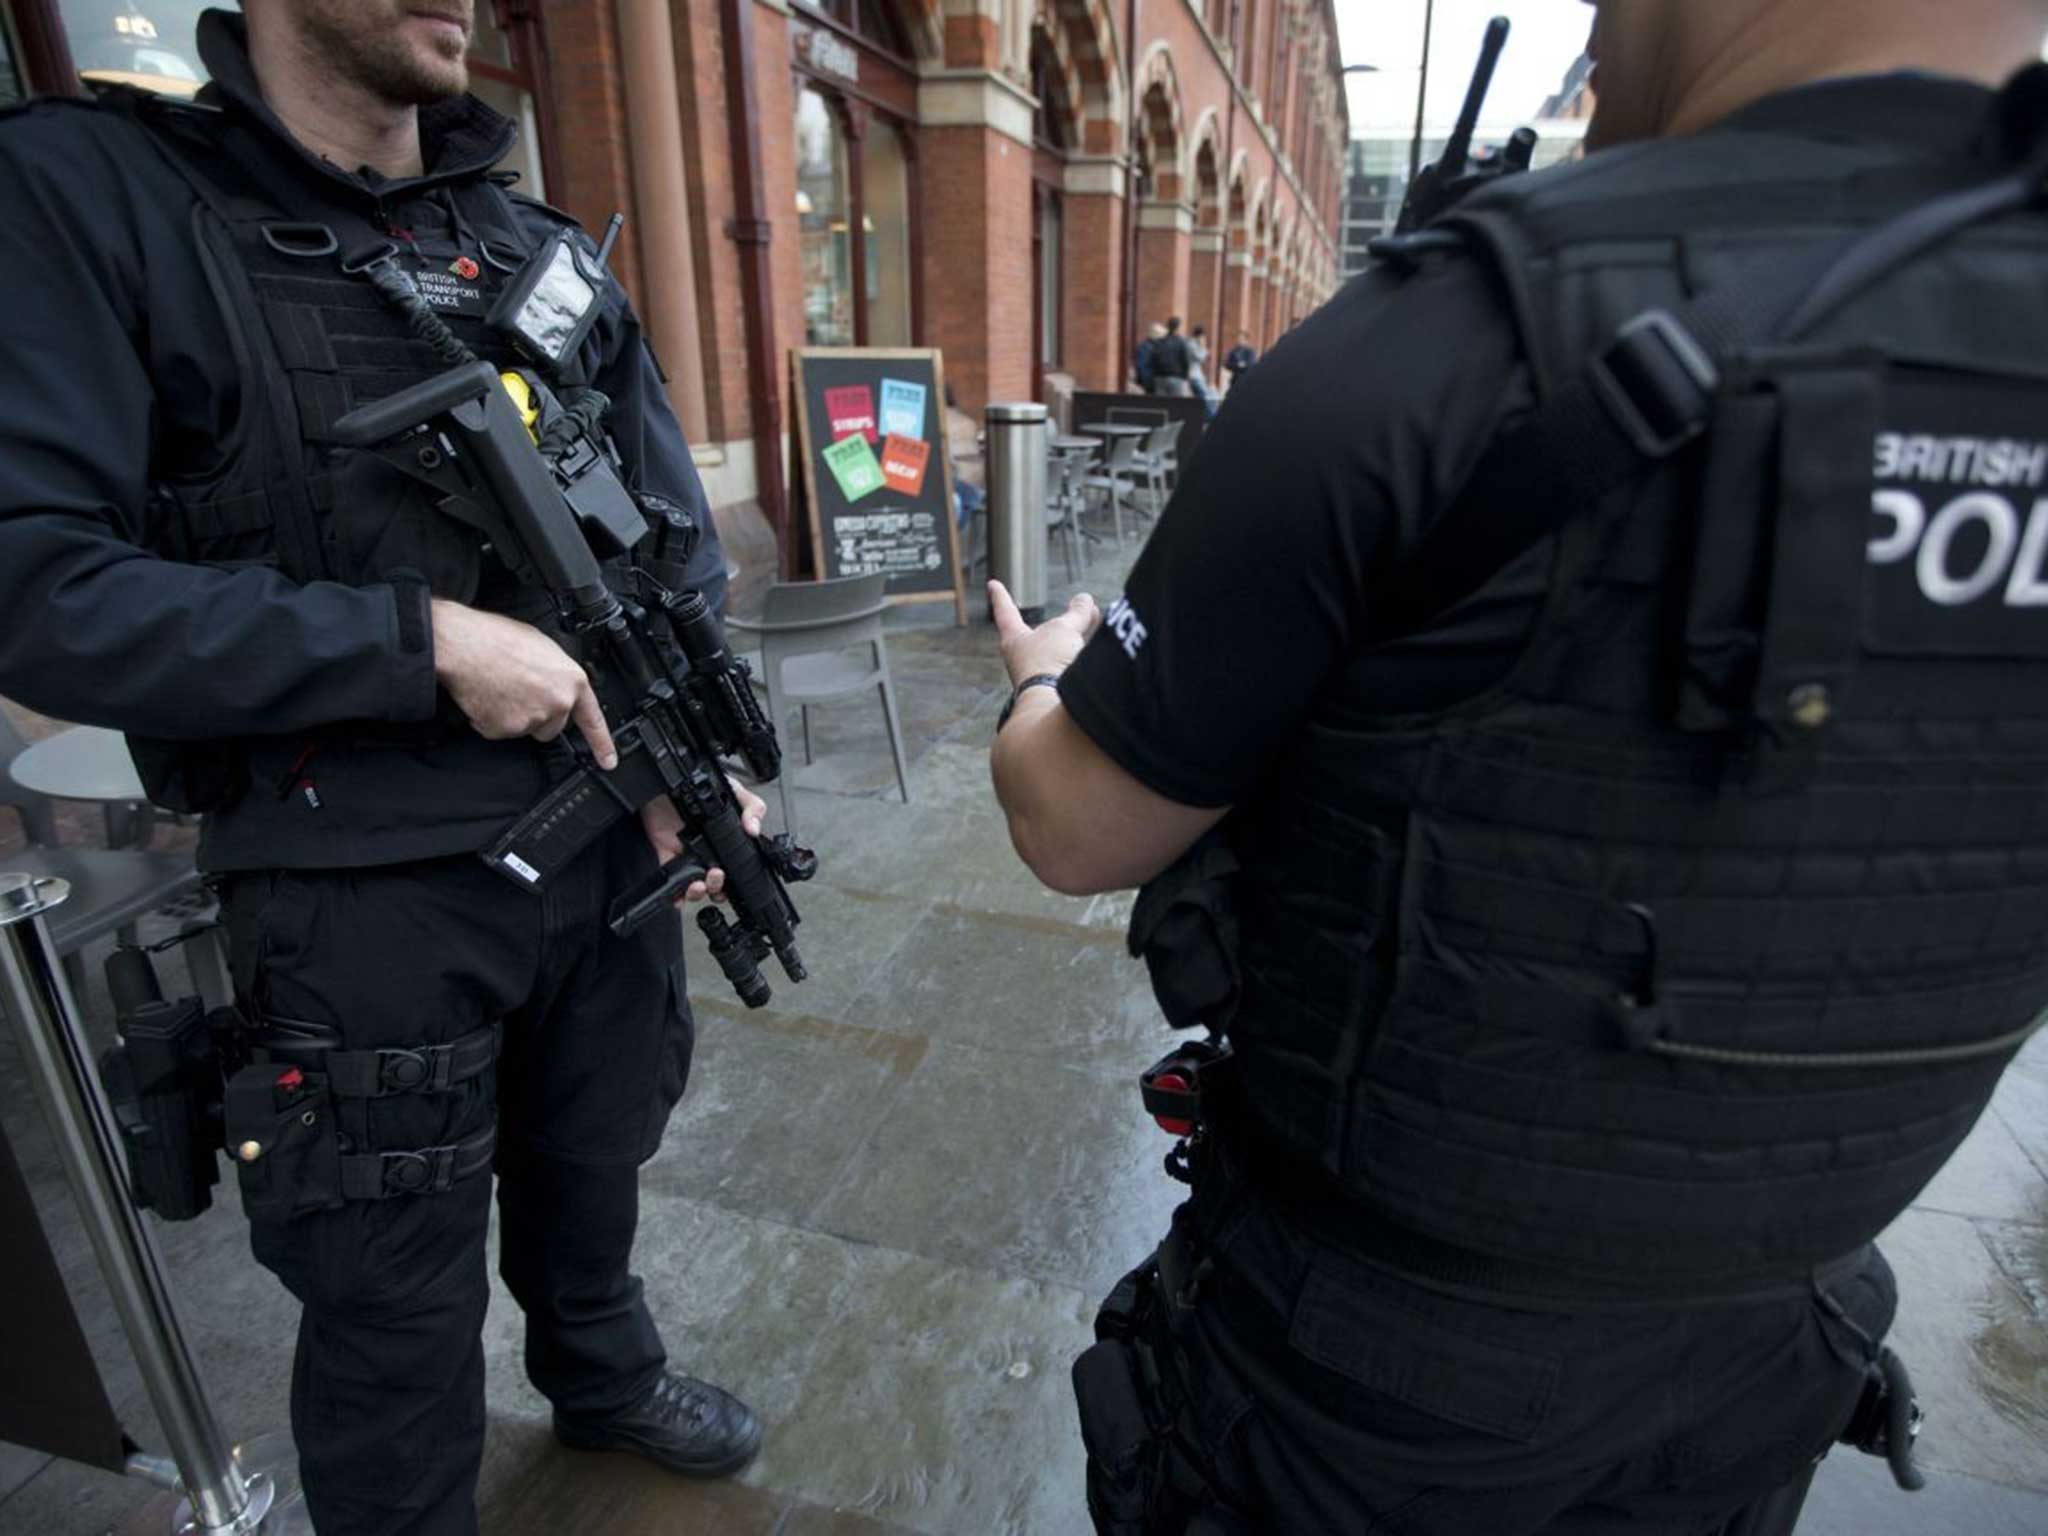 Individuals arrested on 'flimsy' evidence and then released were at greater risk of radicalisation